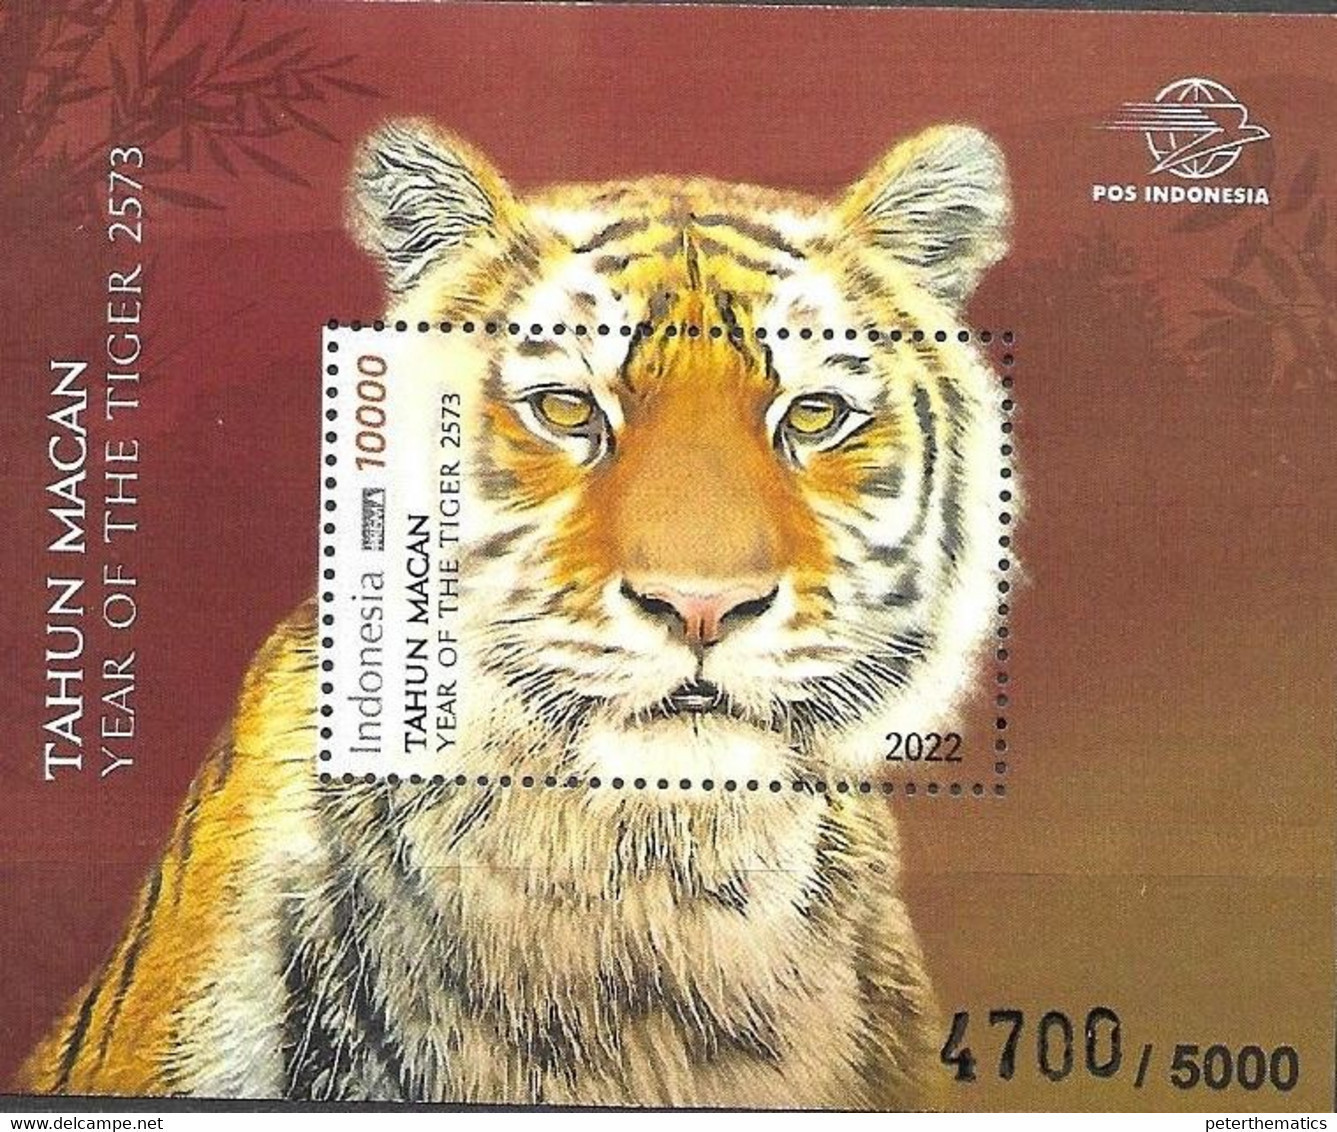 INDONESIA, 2022, MNH,TIGERS, YEAR OF THE TIGER, S/SHEET - Chinese New Year